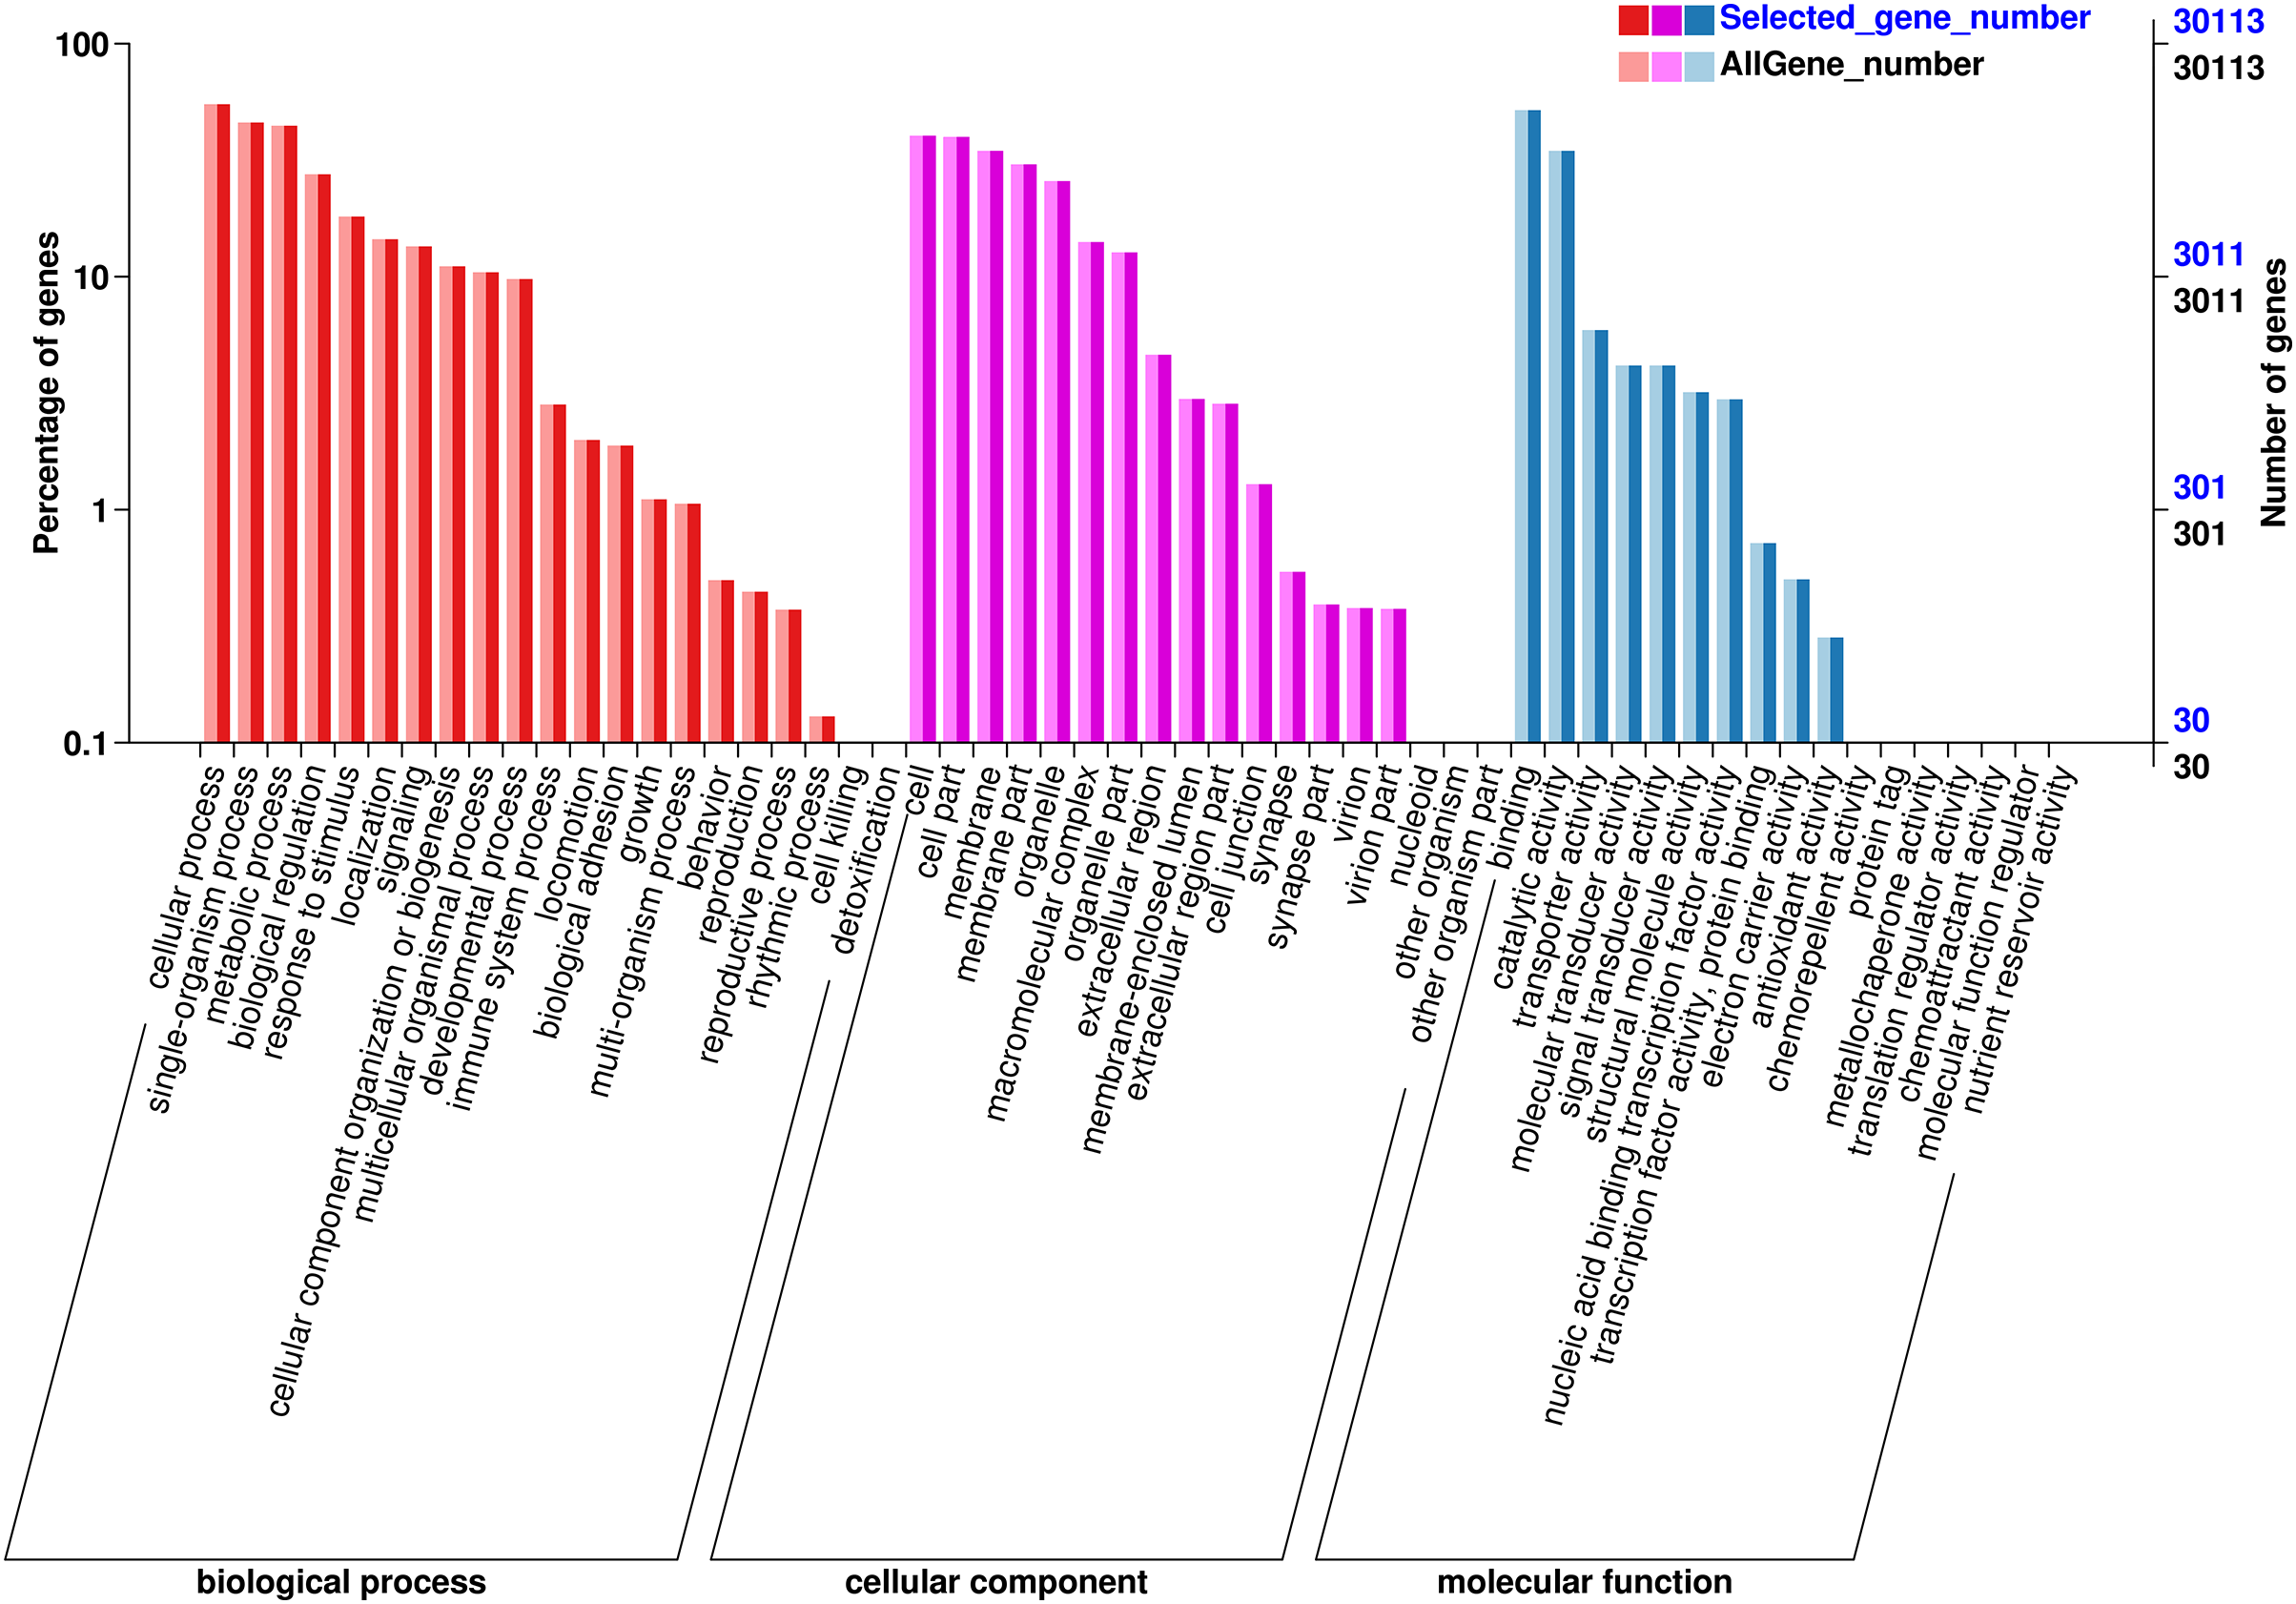 Biochemical indices, gene expression, and SNPs associated with 